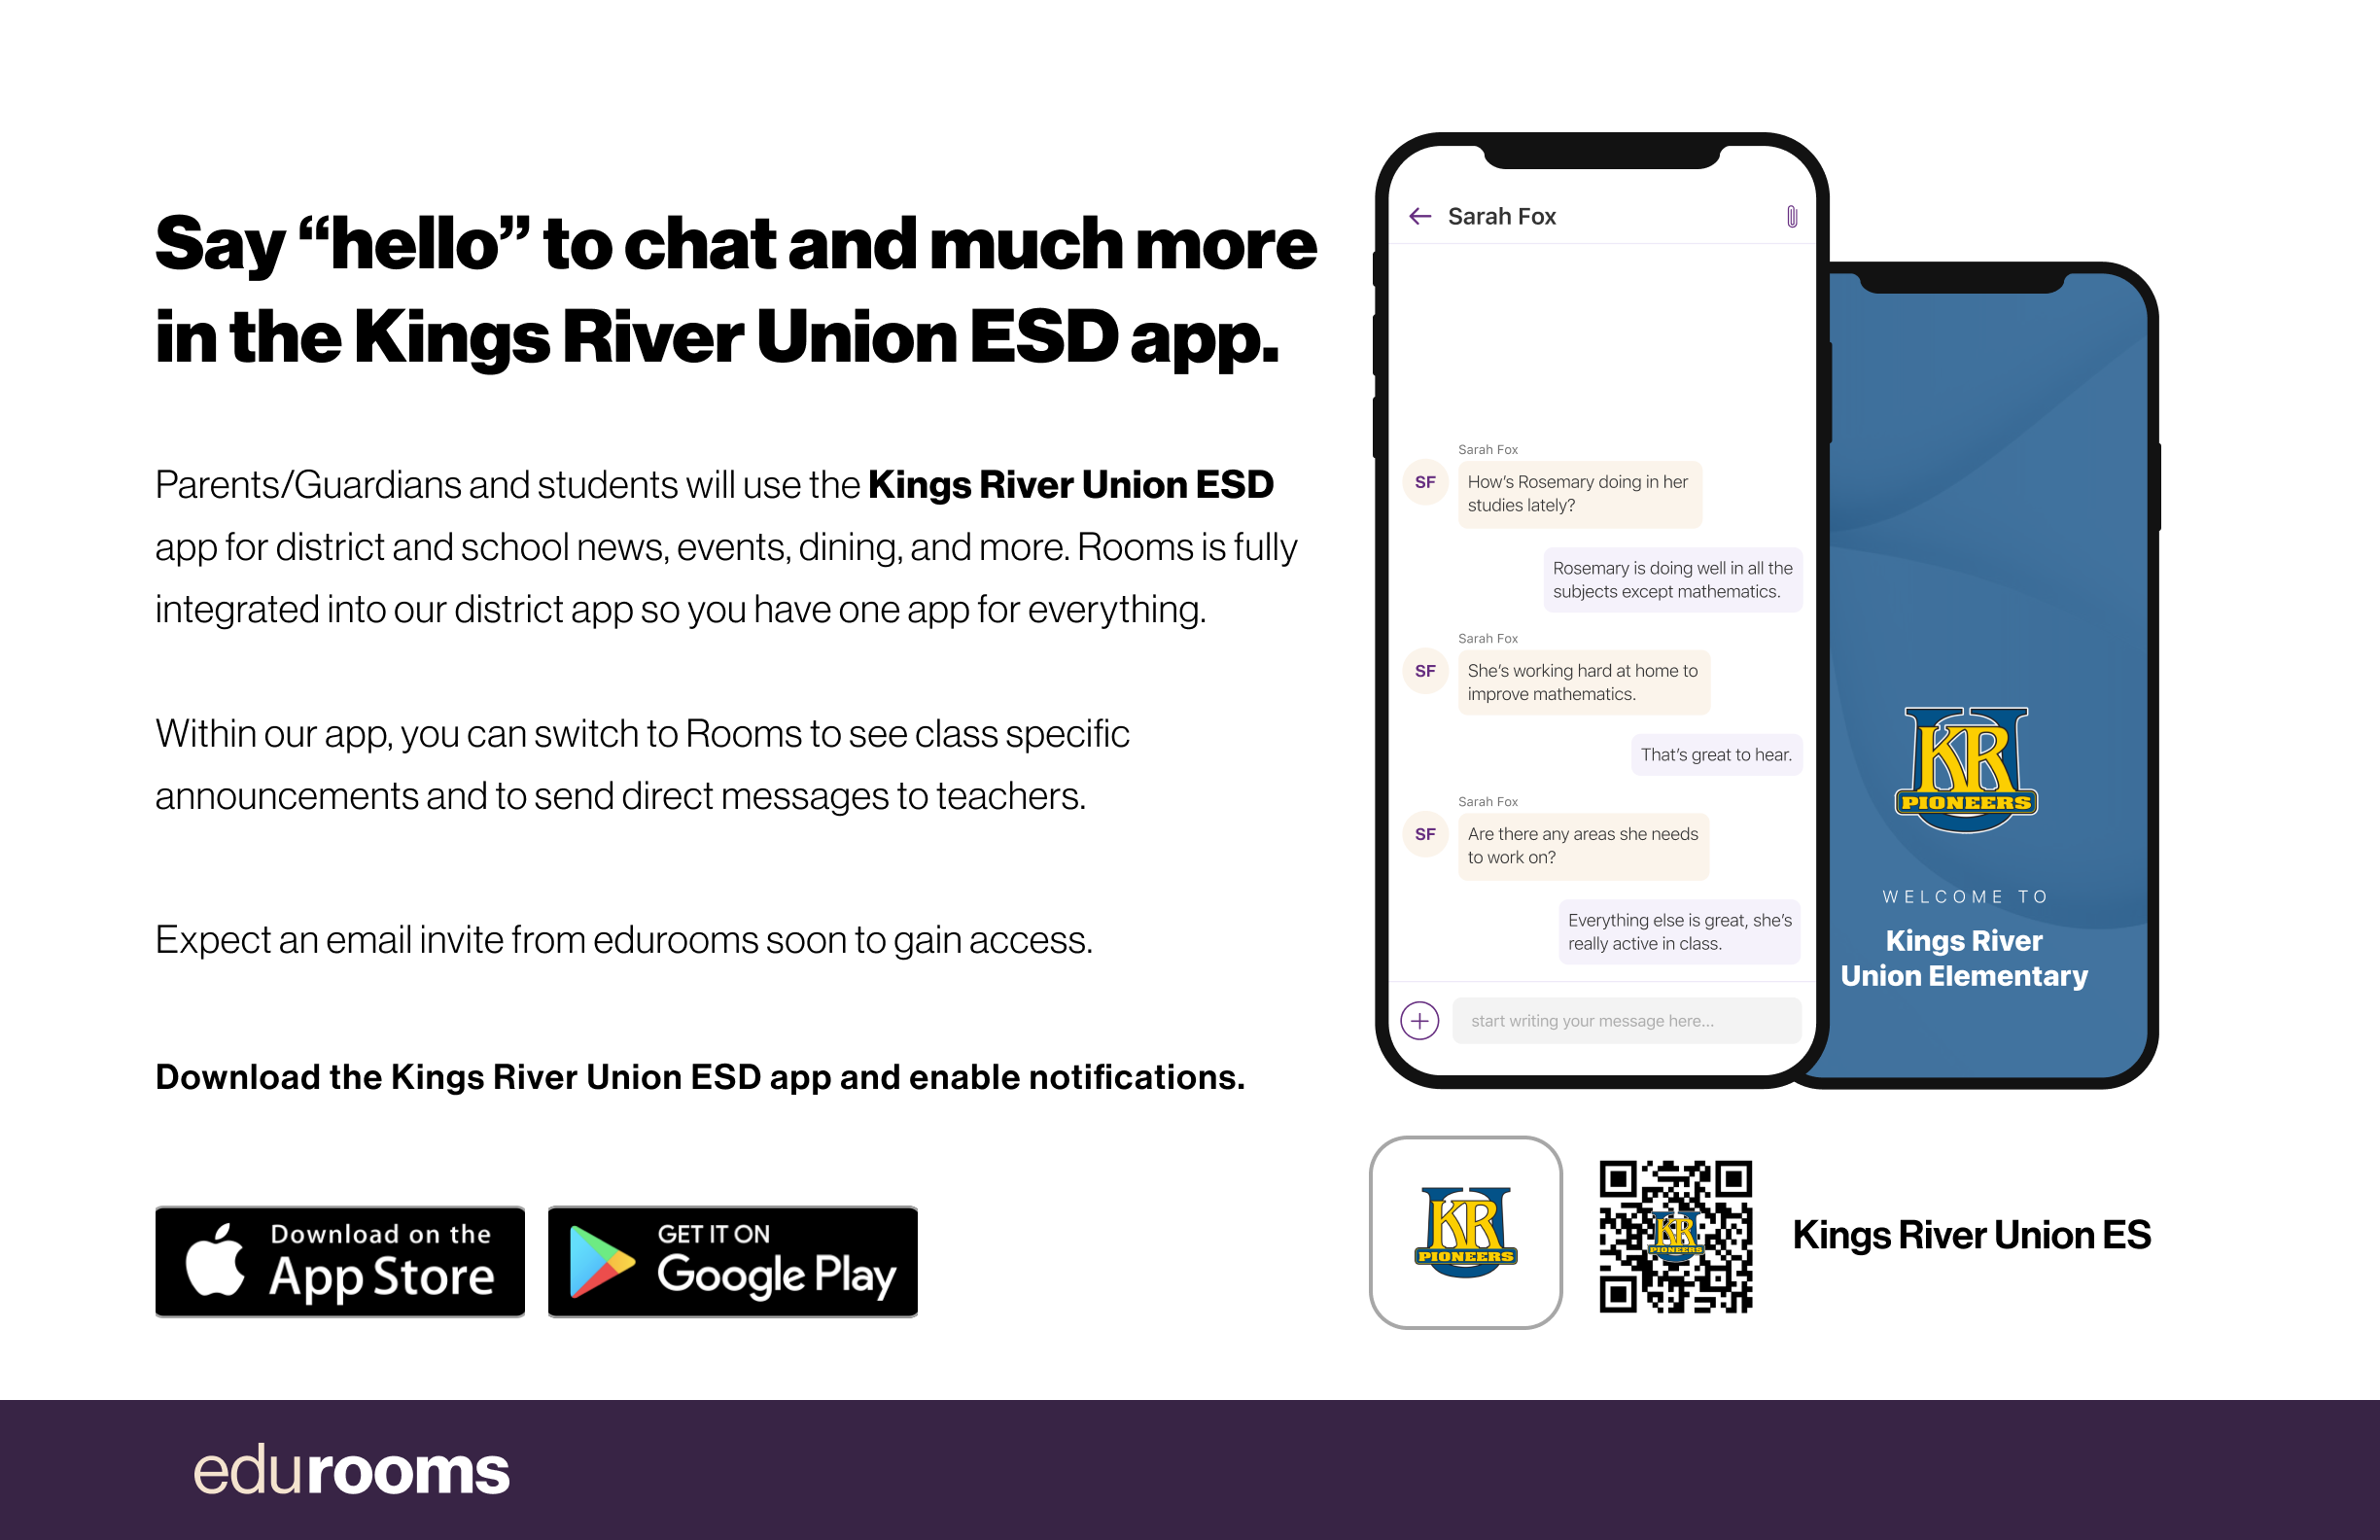 Say "hello" to chat and much more in the Kings River Union ESD app. Parents/Guardians and students will use the Kings River Union ESD app for district and school news, events, dining, and more. Rooms is fully integrated into our district app so you have one app for everything.  Within our app, you can switch to Rooms to see class specific announcements and to send direct messages to teachers. Download the Kings River Union ESD app and enable notifications.